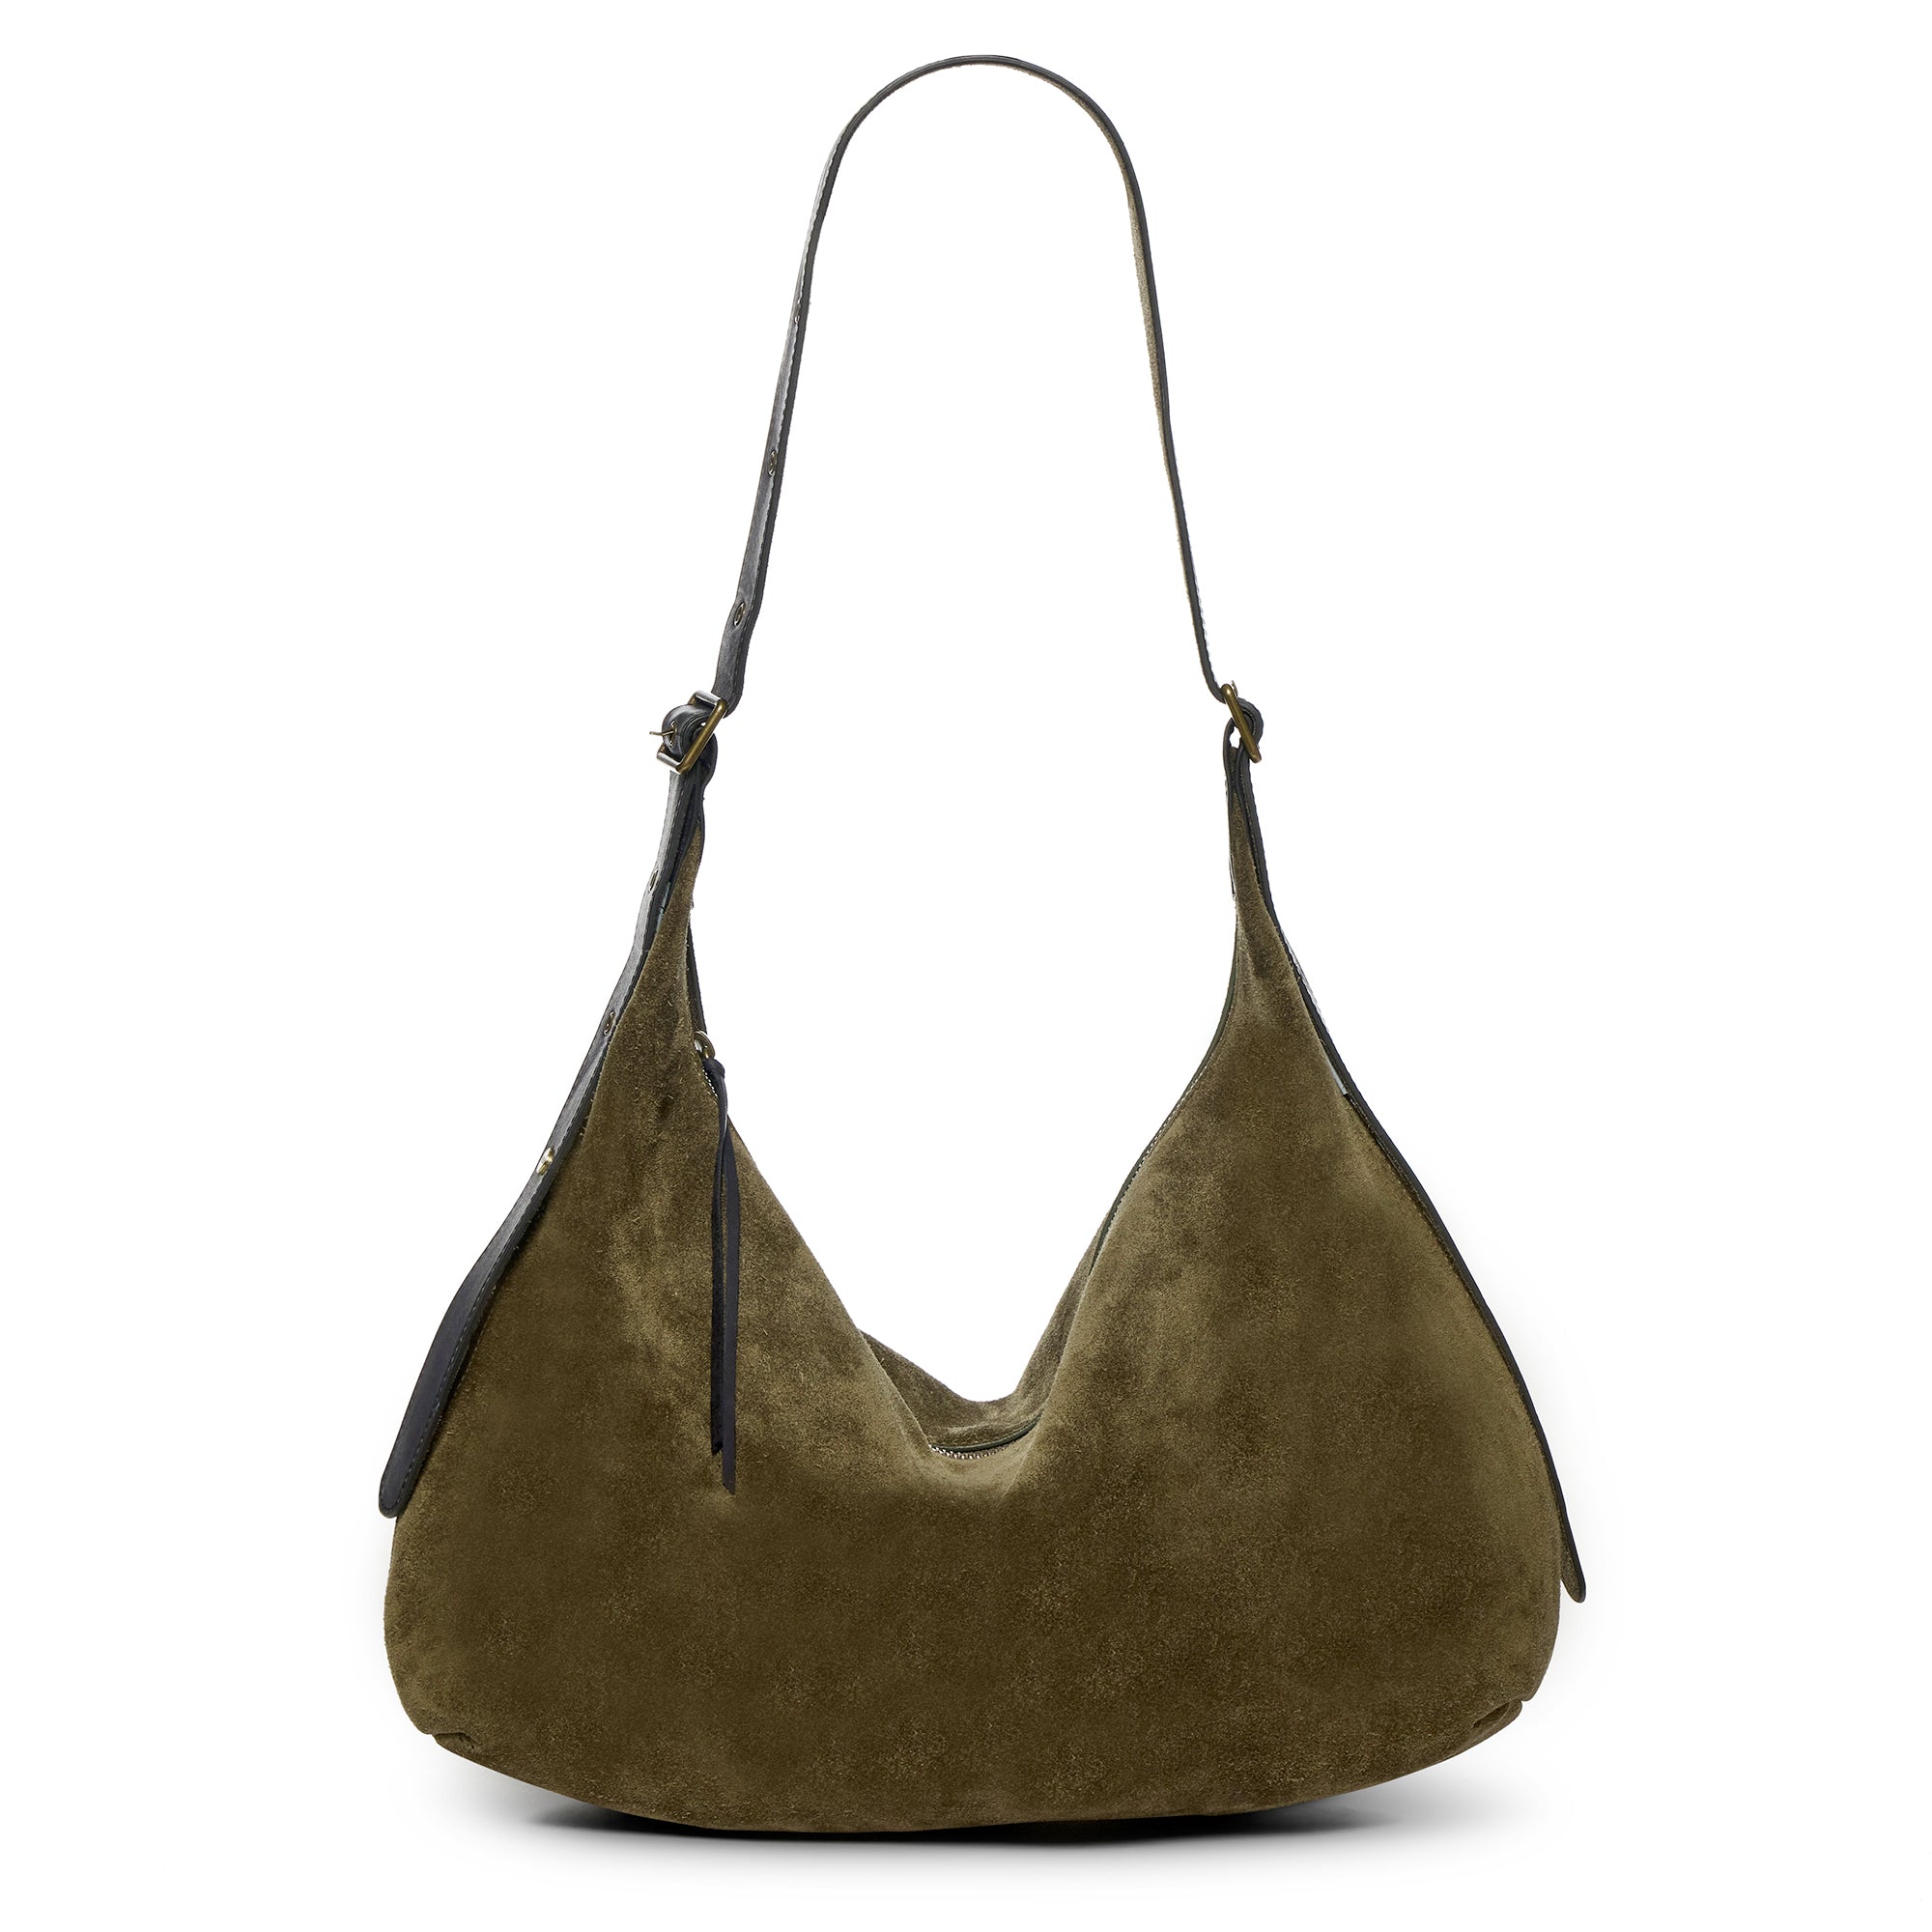 Women's Slouchy Suede Leather Tote Bag